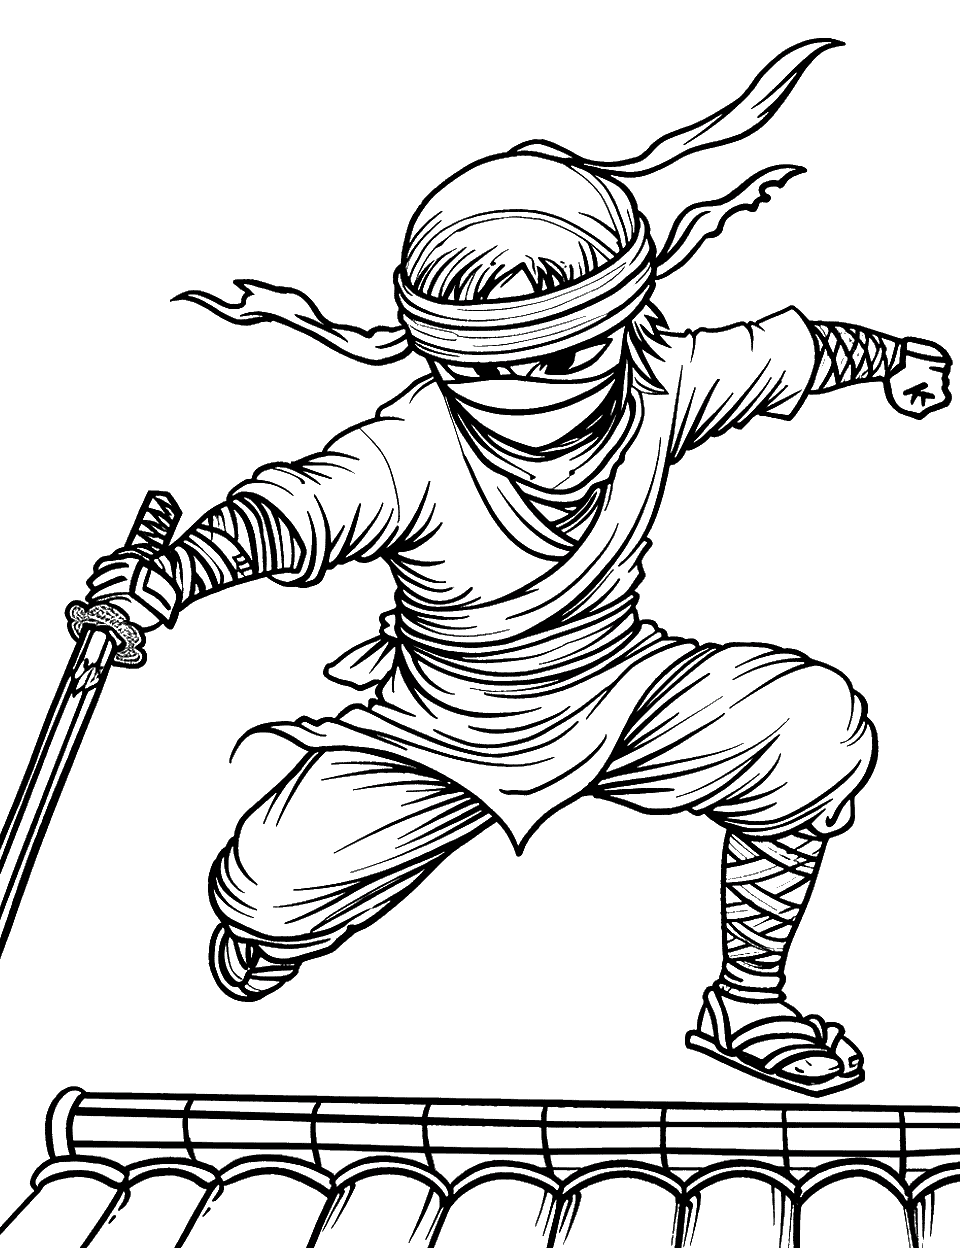 High Jump Over the Roof Ninja Coloring Page - A ninja performing a high jump over a traditional Japanese roof.